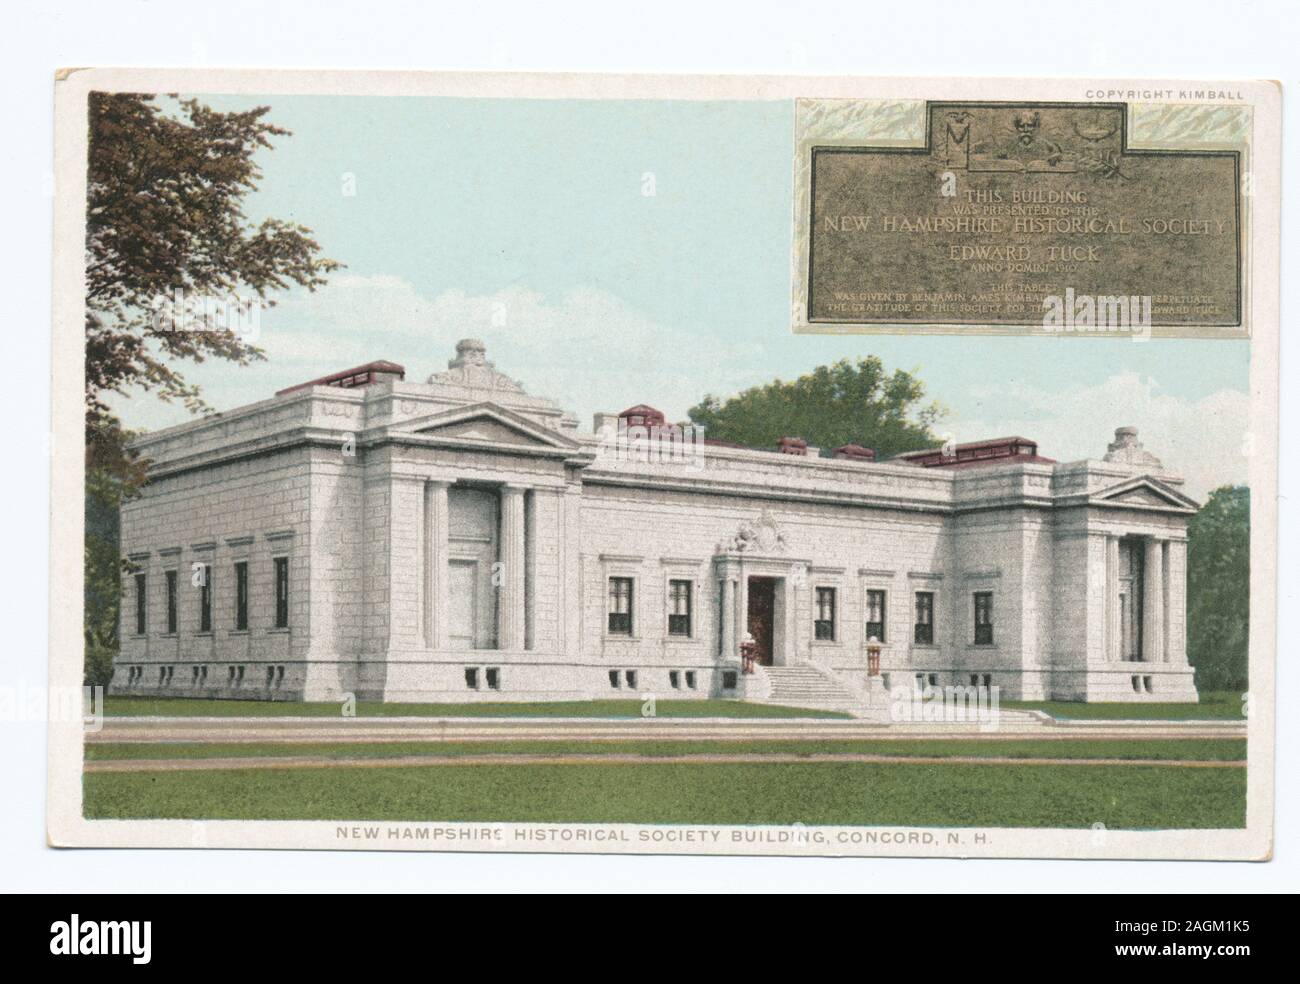 new-hampshire-historical-society-building-concord-n-h-new